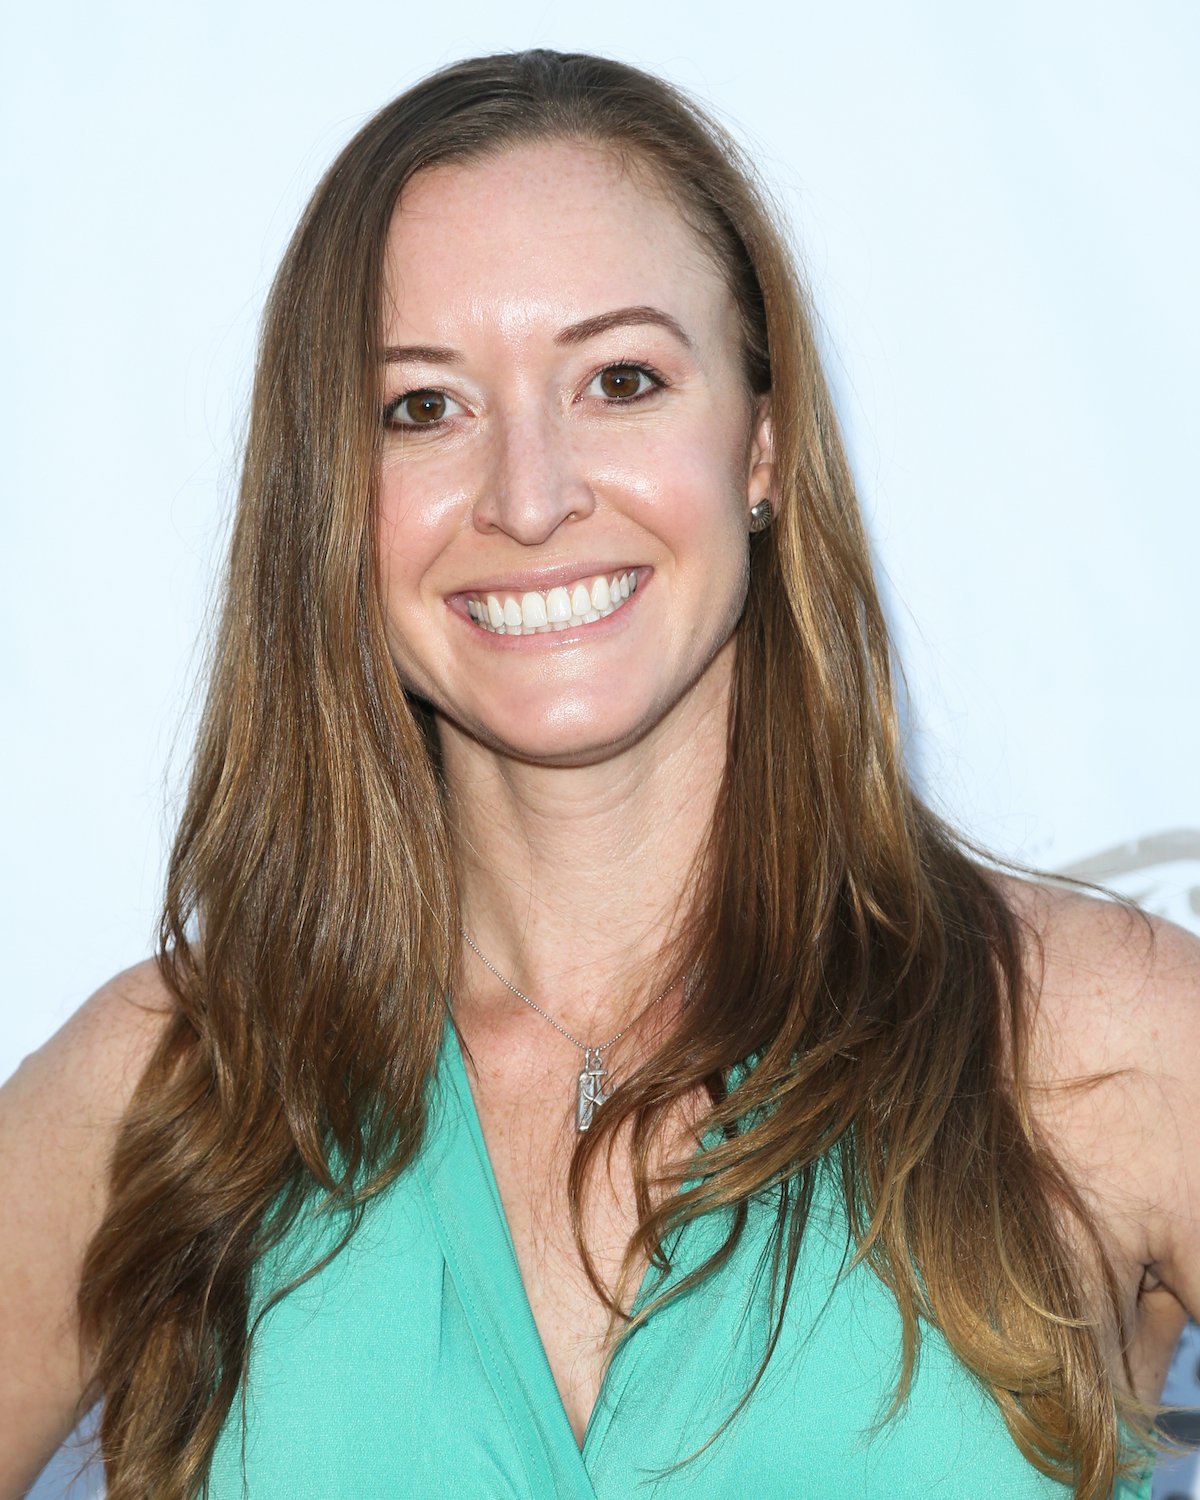 Adrienne Gang from Below Deck attended an event in 2013